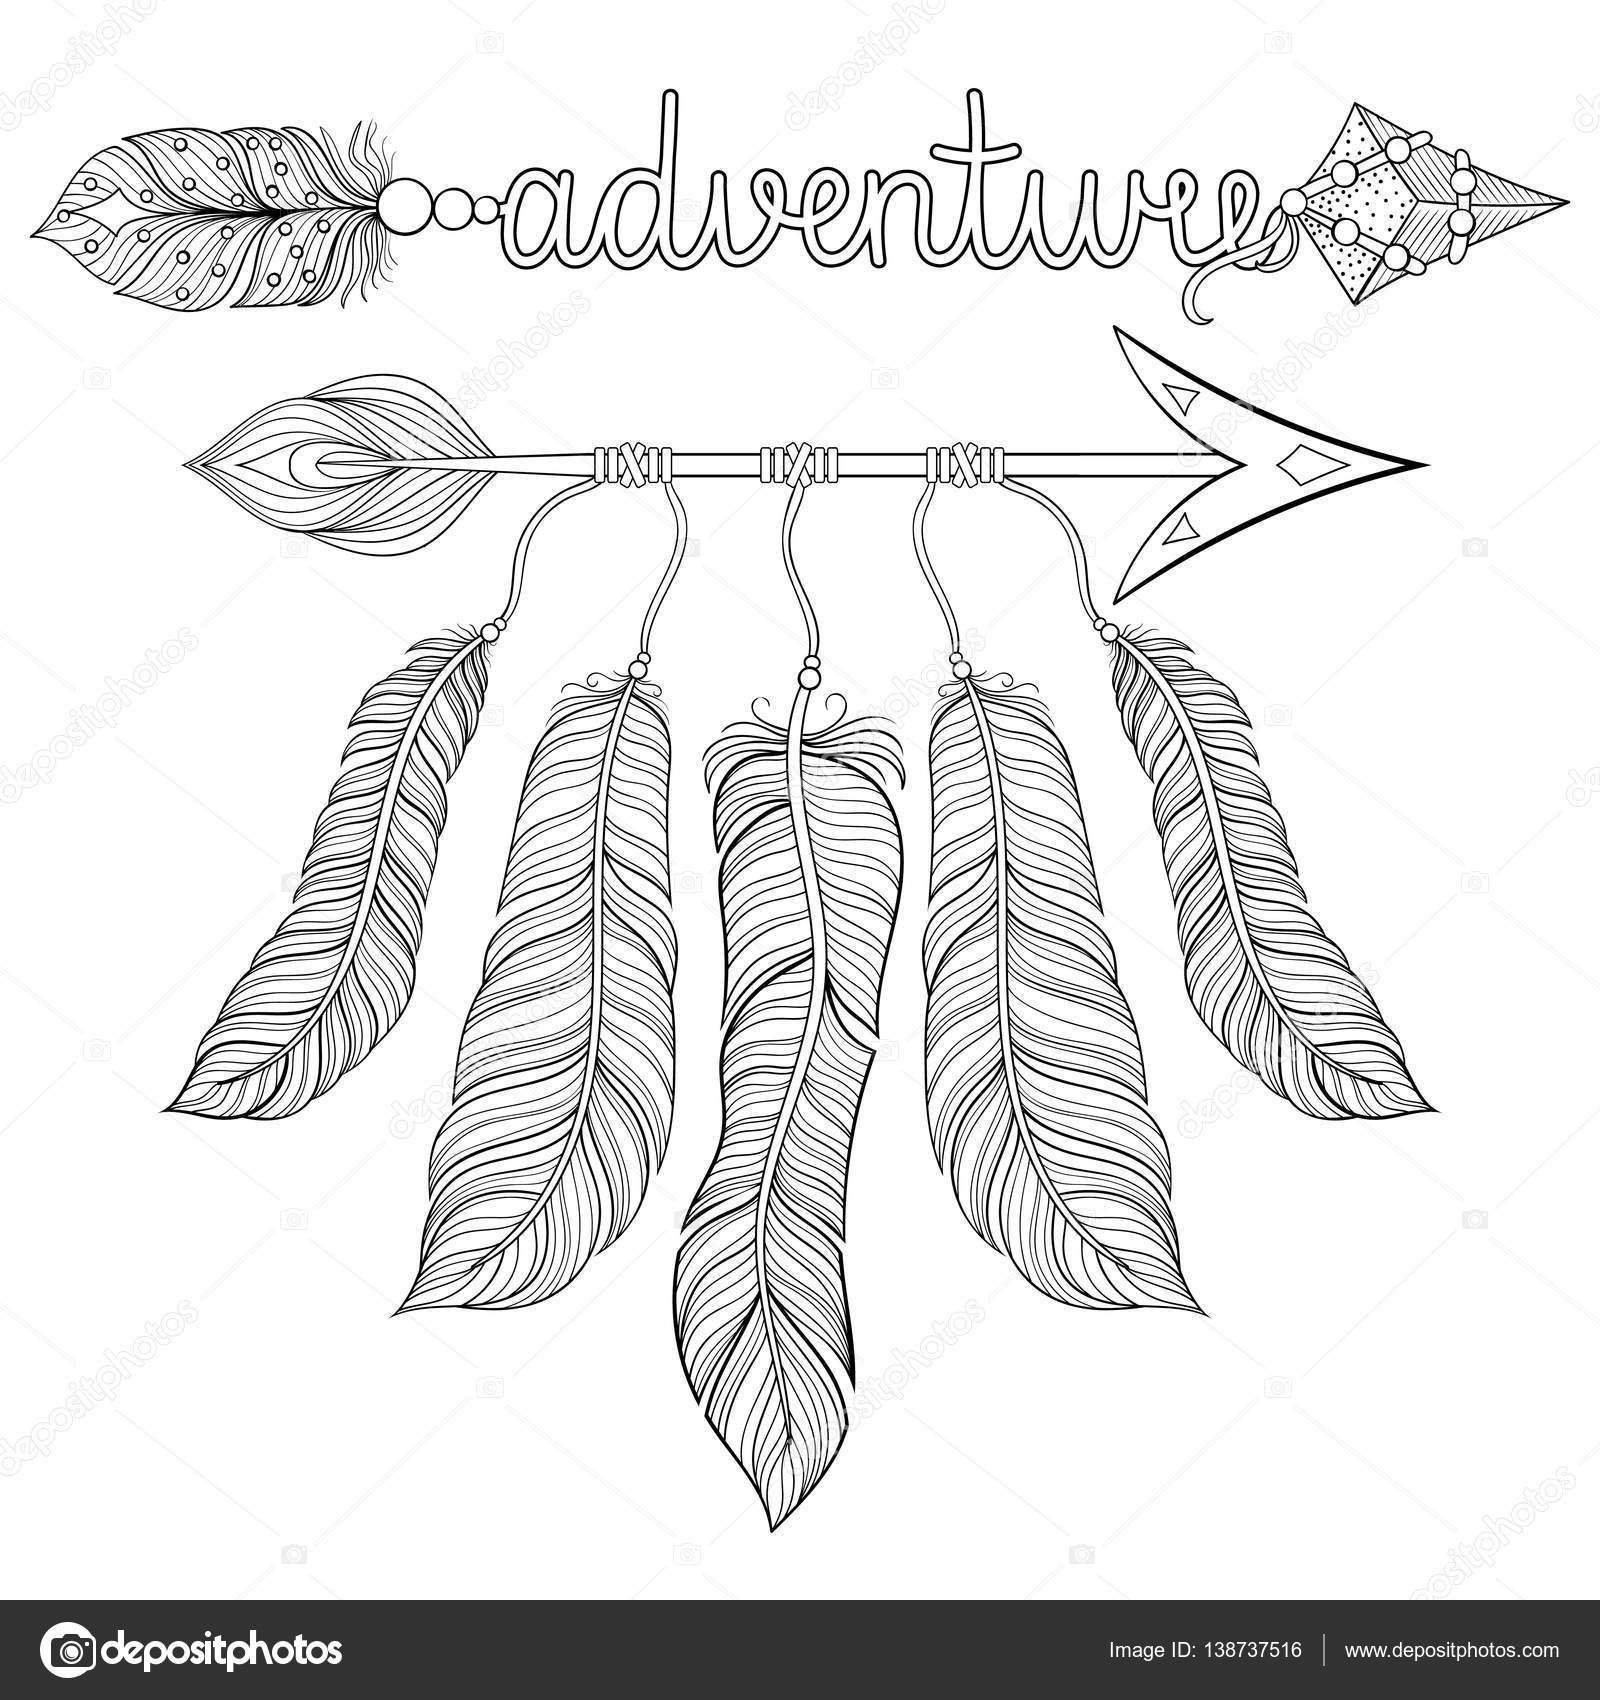 Boho chic ethnic dream Arrow with feathers dreamcatcher adventure lettering Hand drawn American Indian style zentangle illustration for adult coloring